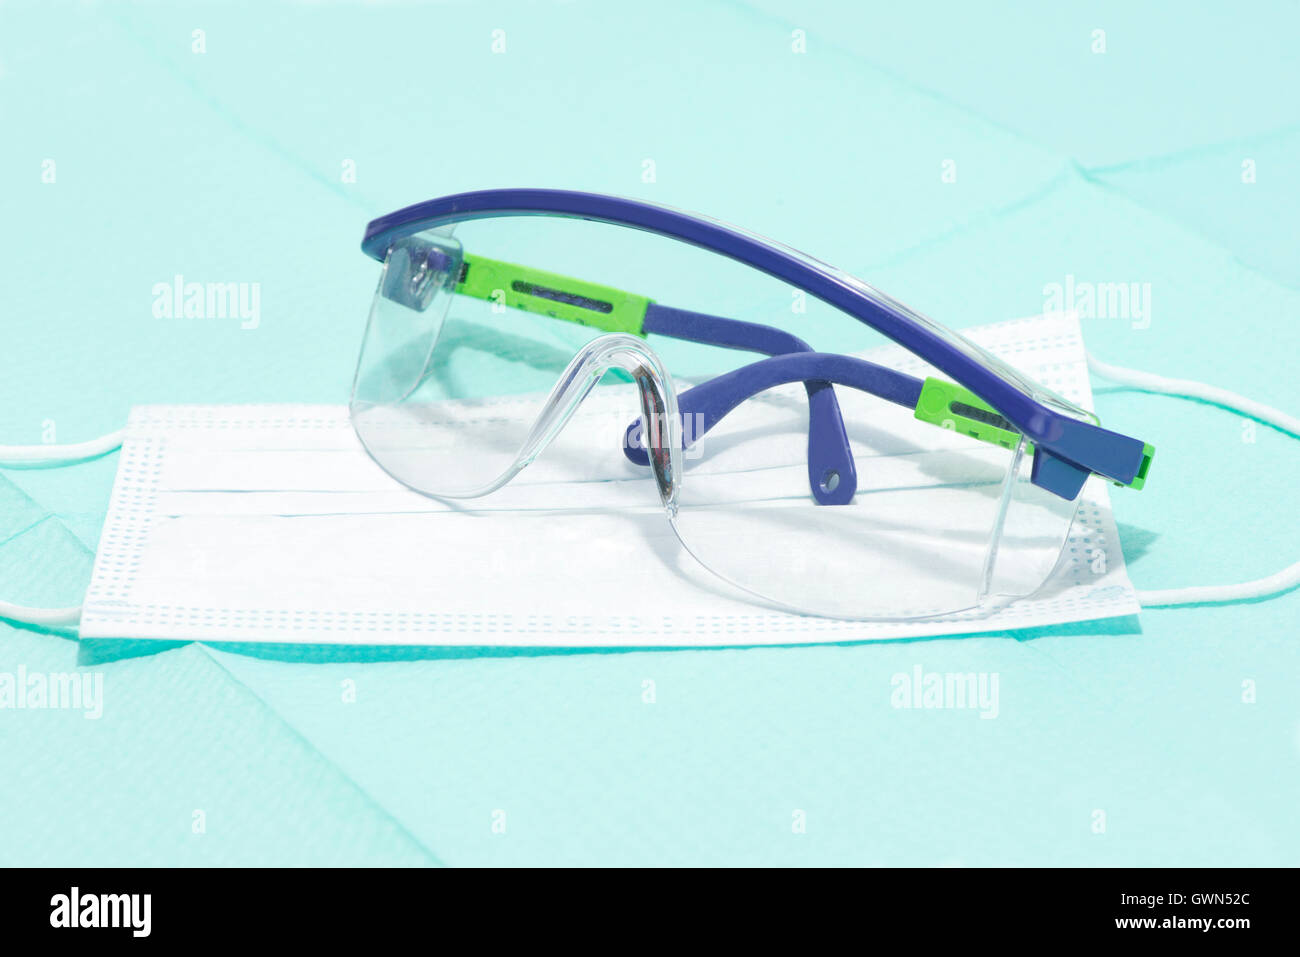 Safety glasses and mask on sterile drape for personal protection during medical procedures. Stock Photo